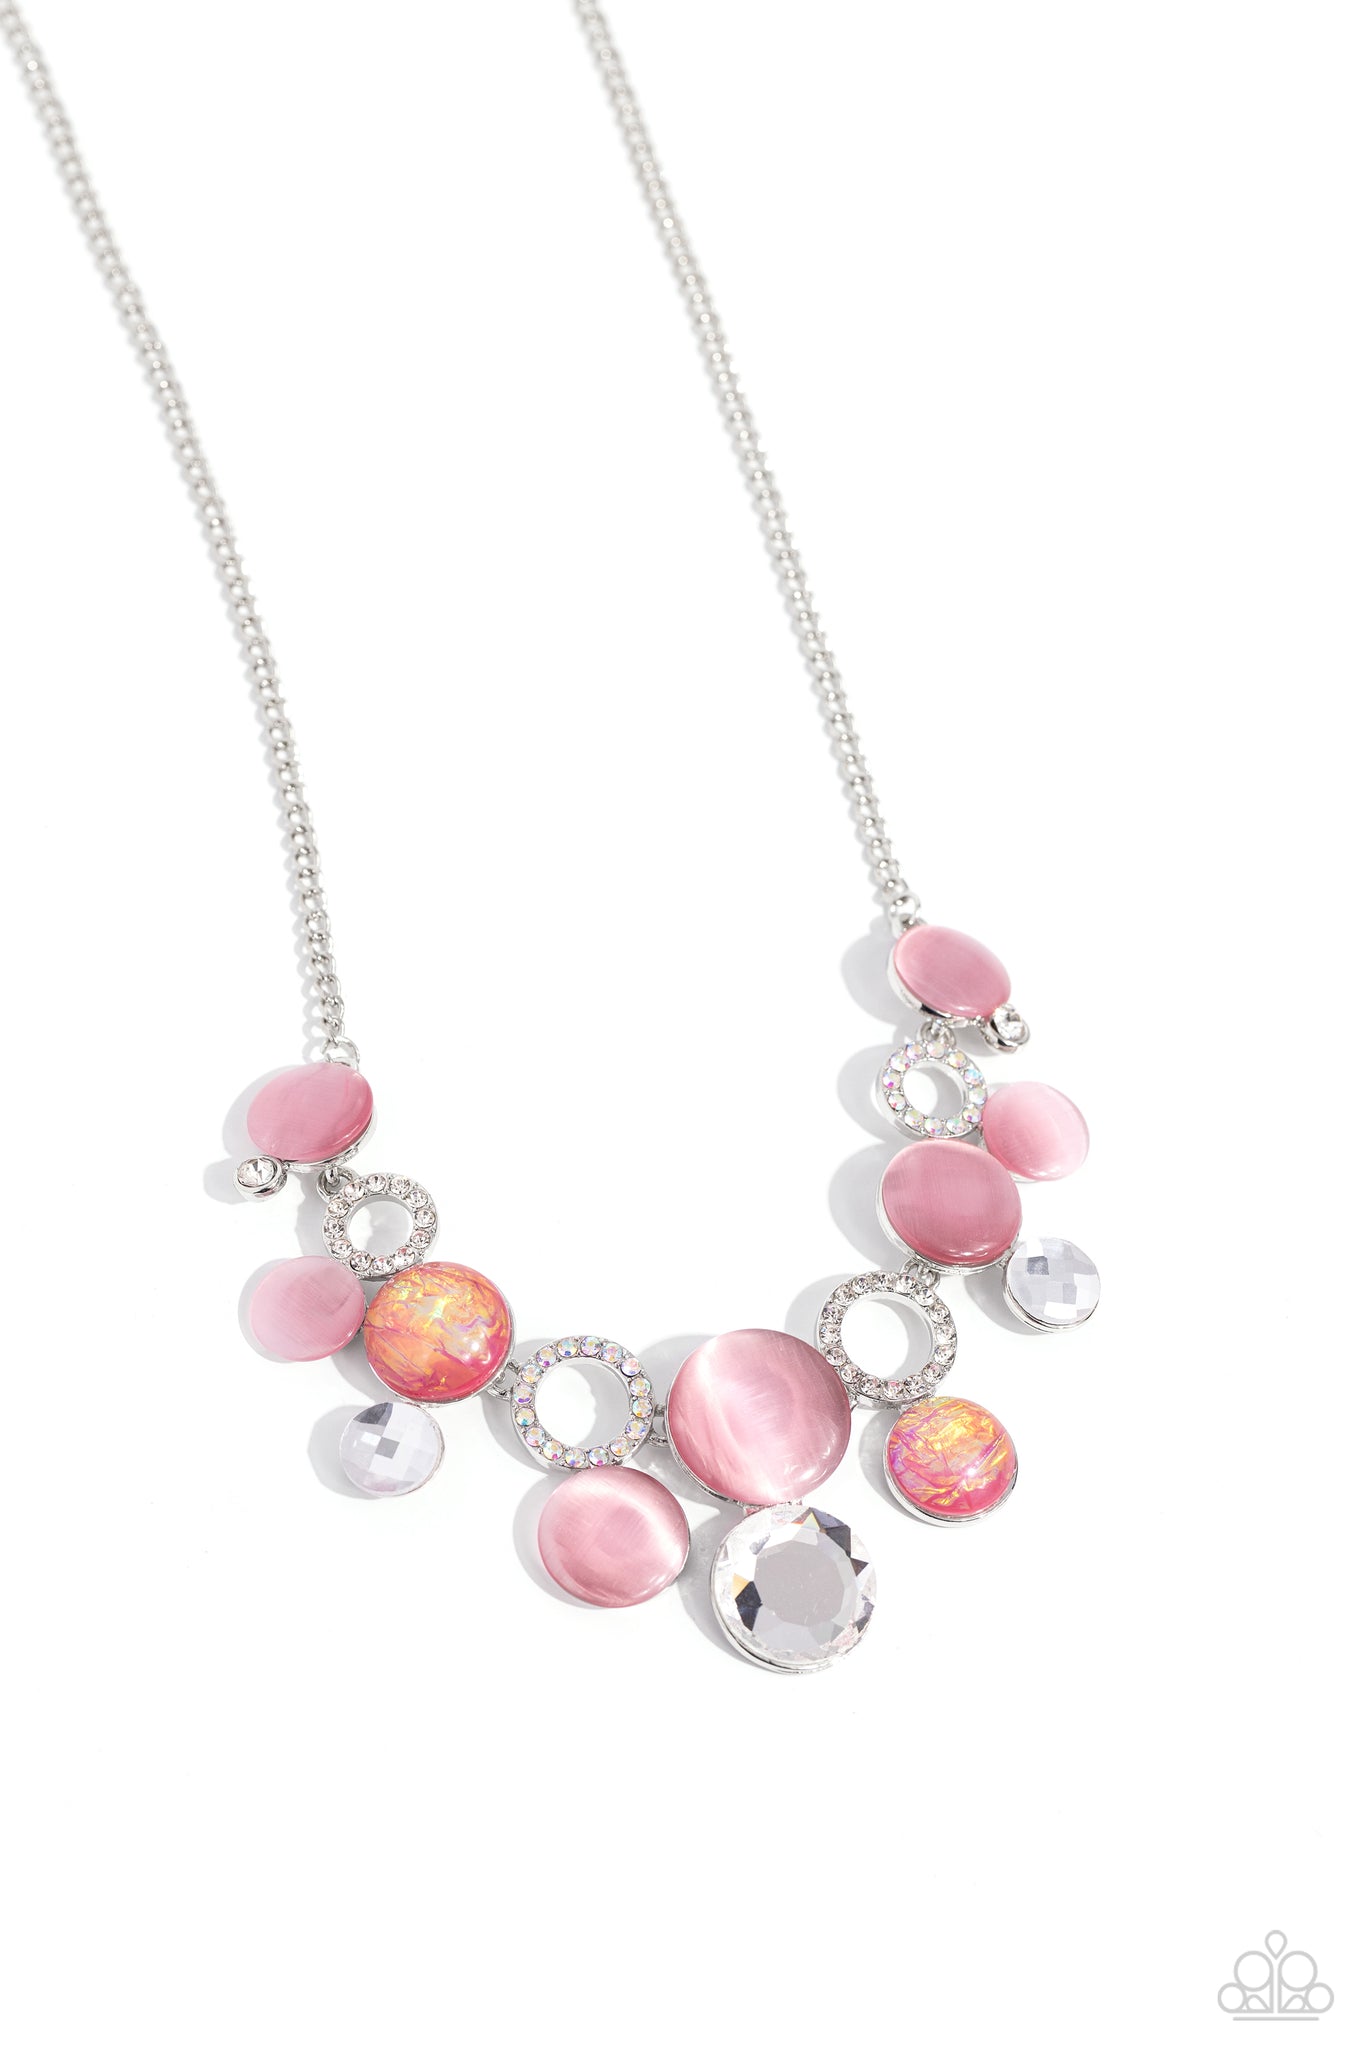 Corporate Color Pink Necklace